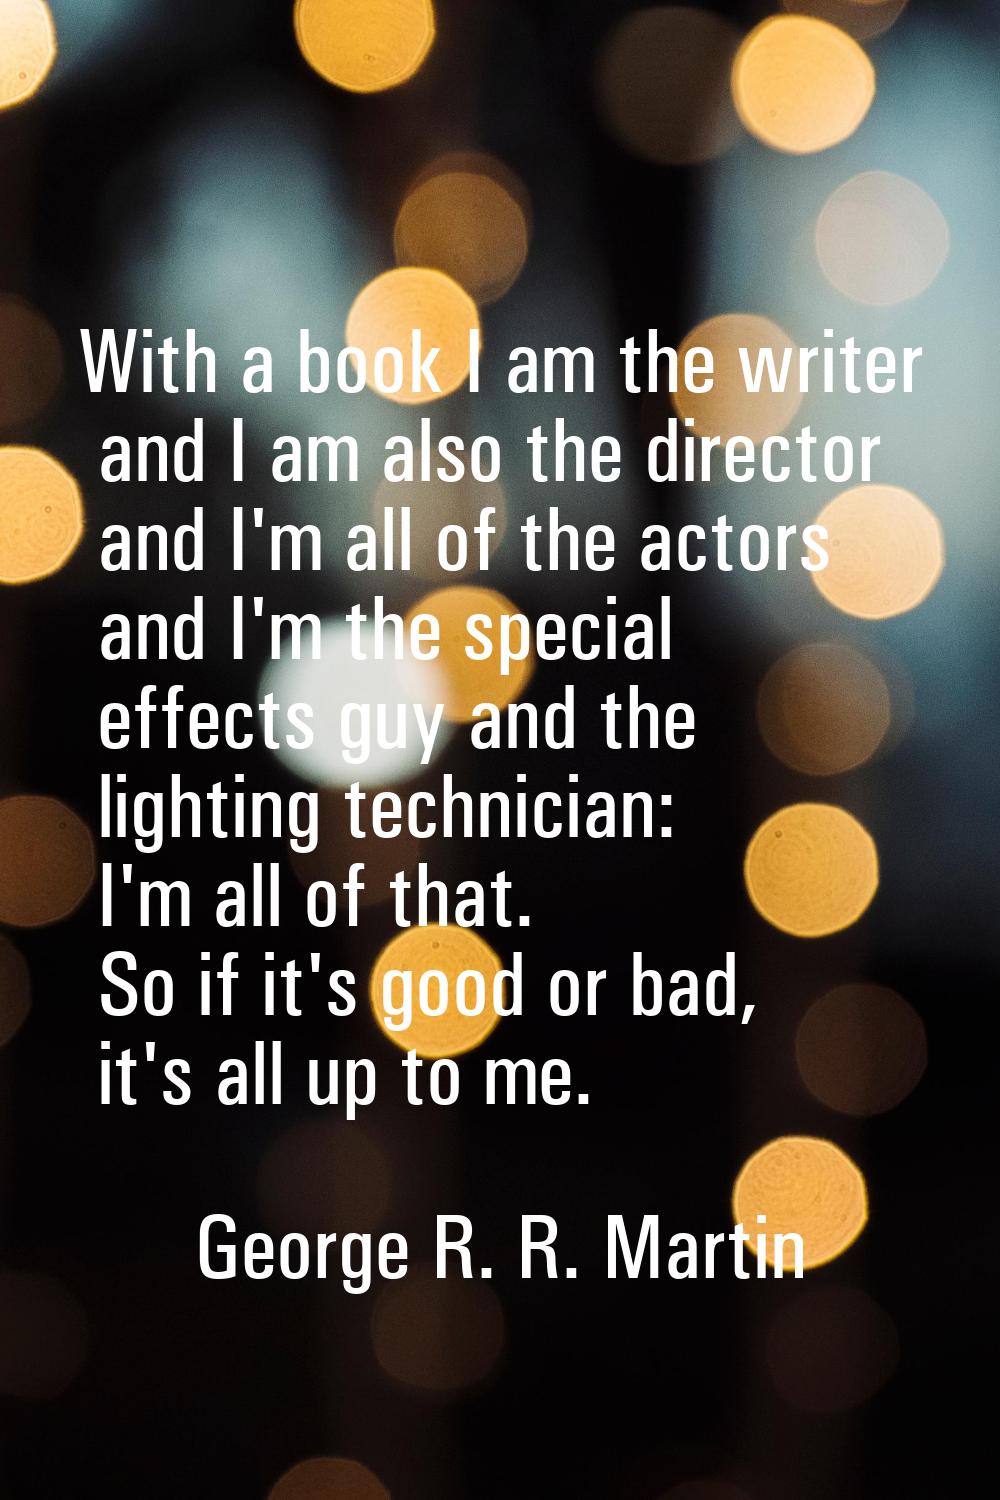 With a book I am the writer and I am also the director and I'm all of the actors and I'm the specia